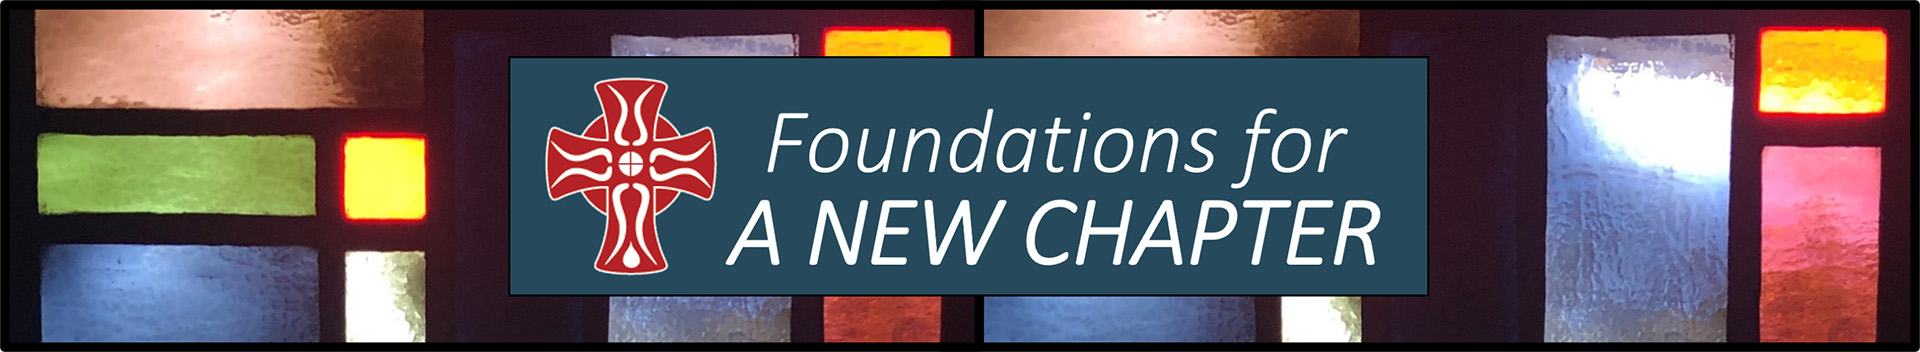 Foundations for a New Chapter